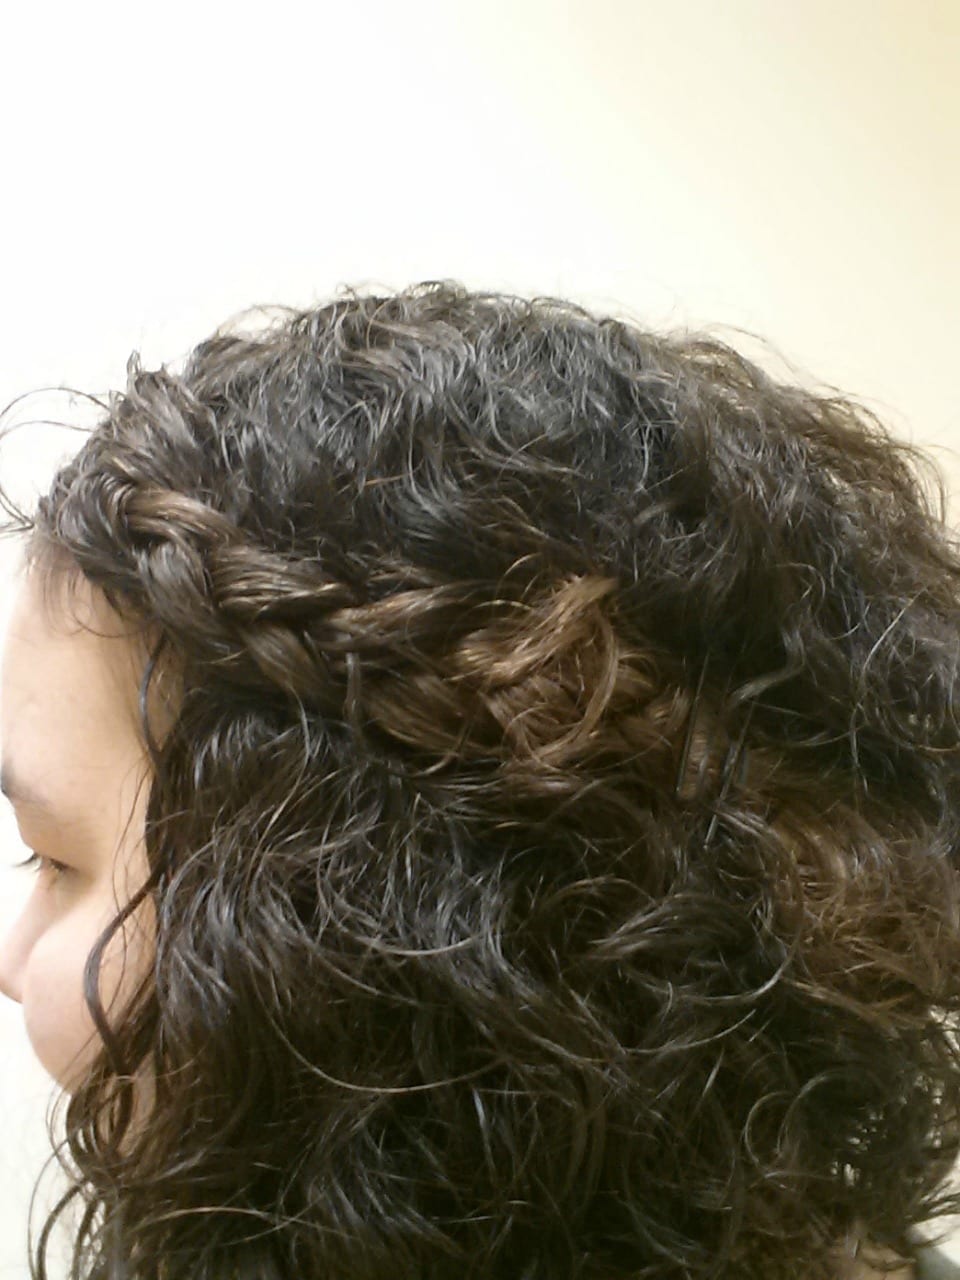 Curly Hair Tips - The Grant Life